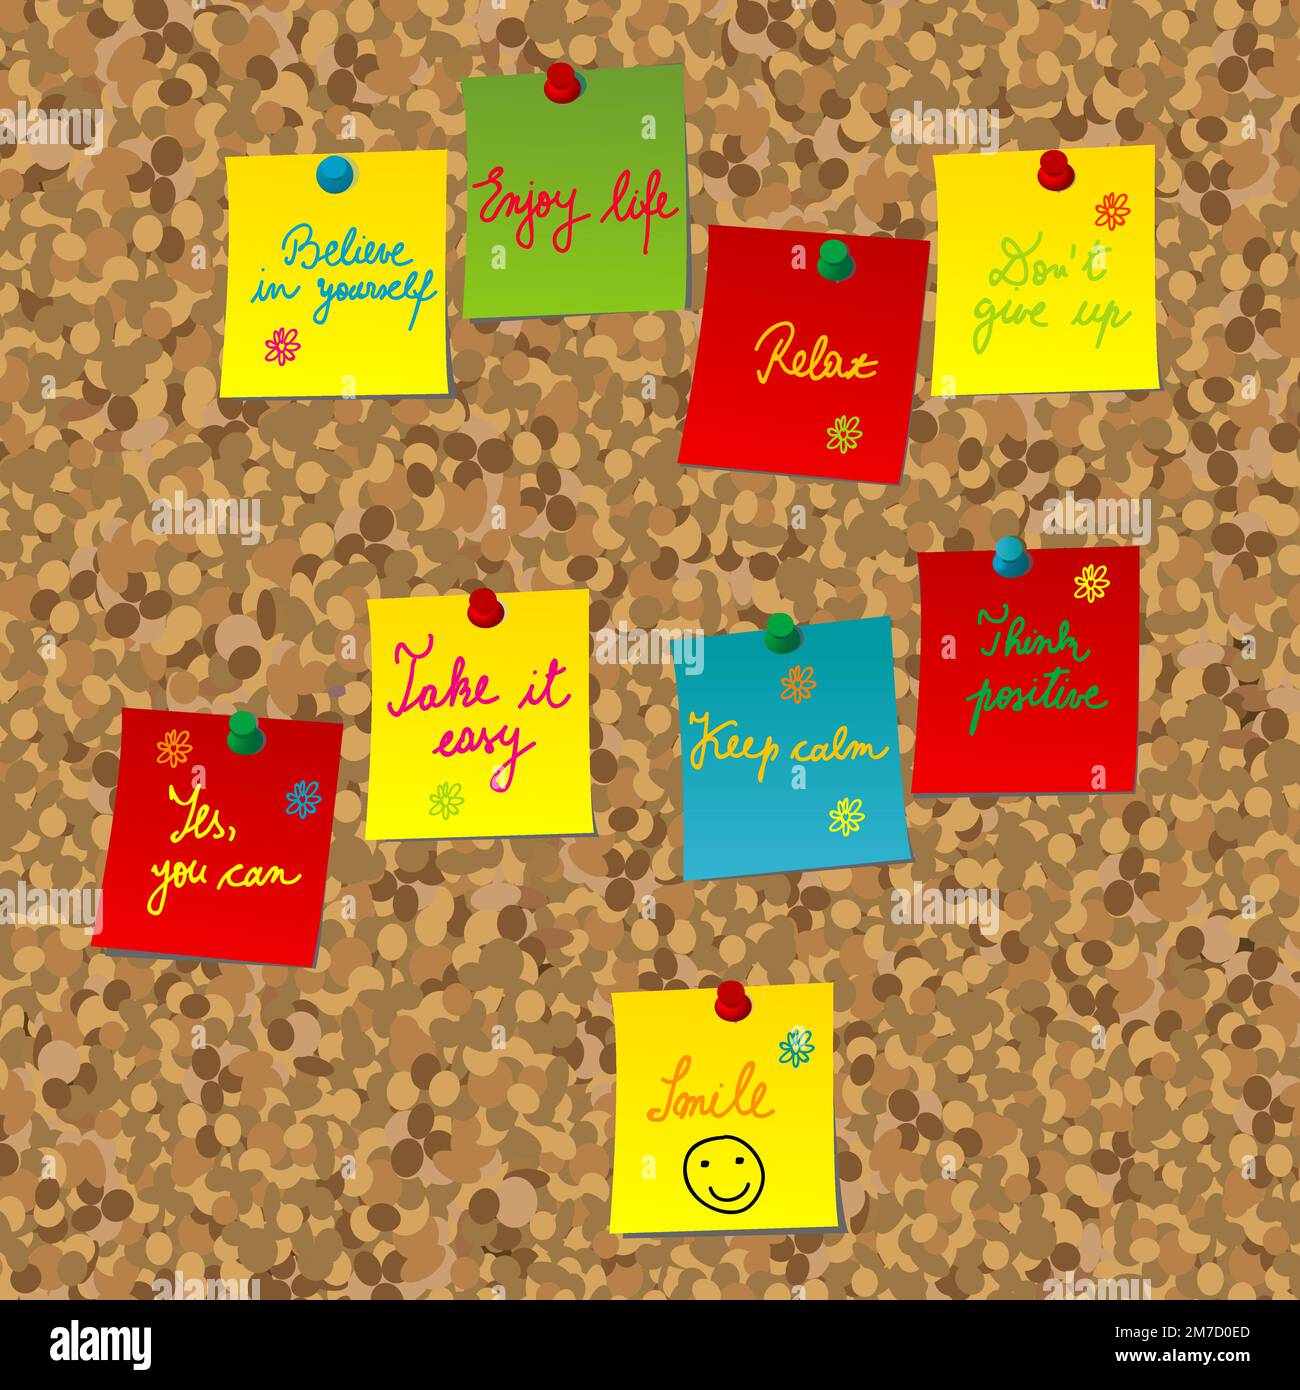 Cork board with positive messages on colorful sticky notes Stock Vector